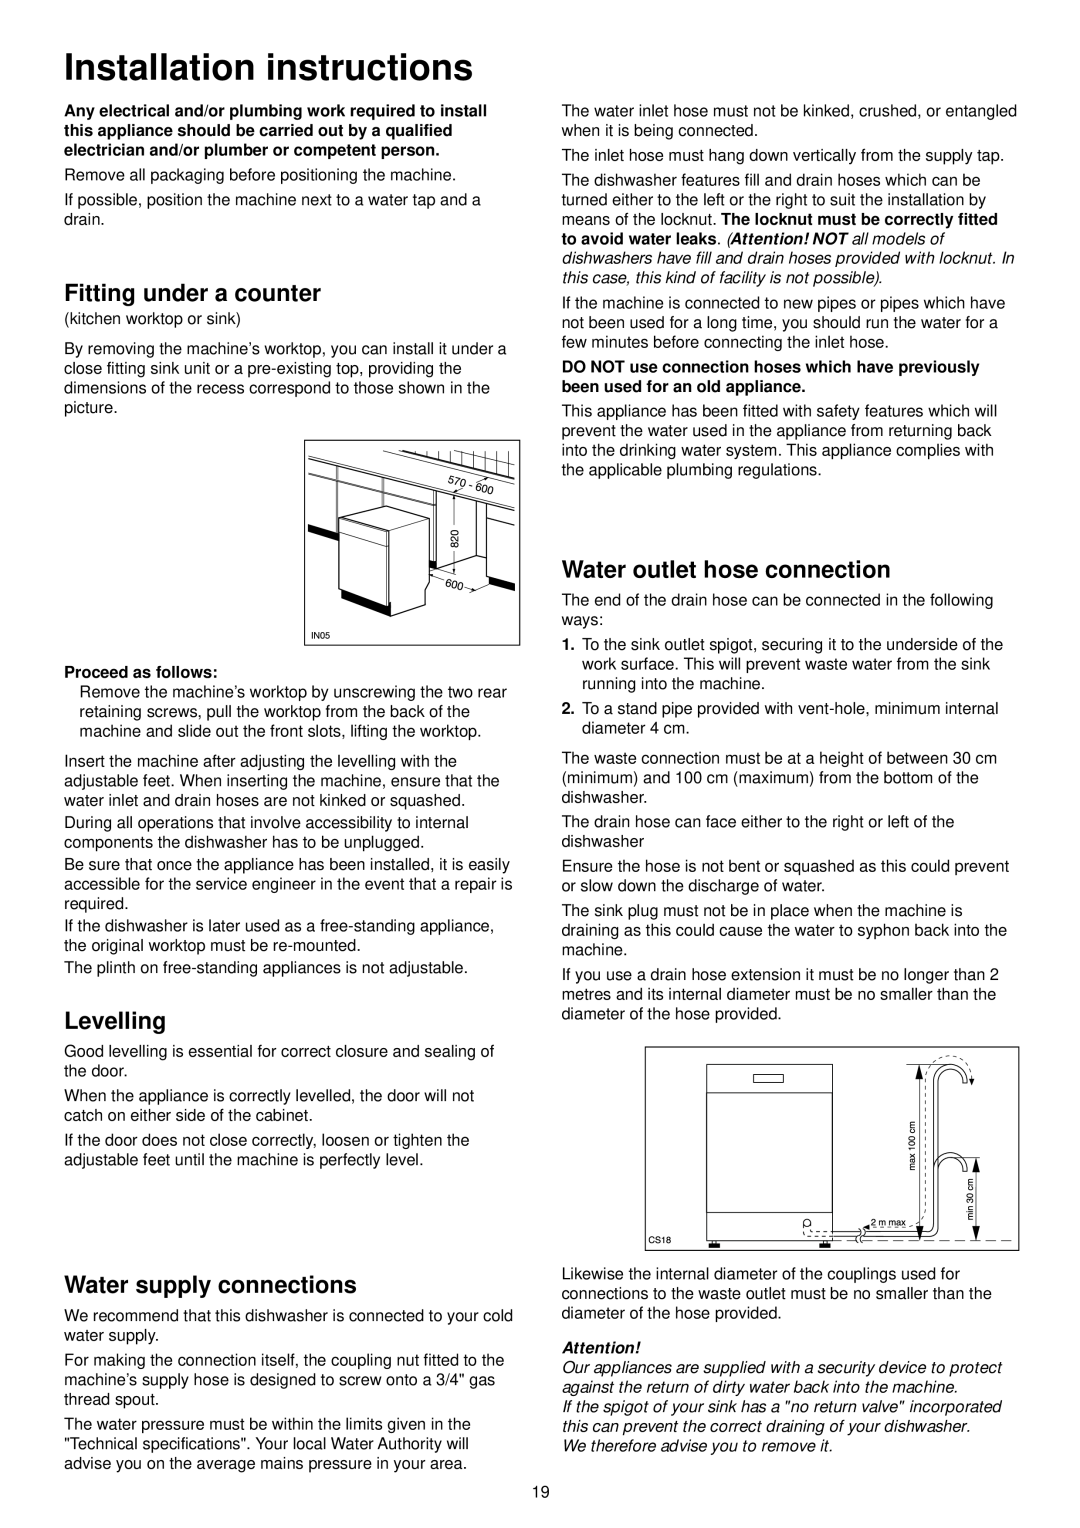 Zanussi ZDF301 manual Installation instructions, Fitting under a counter, Levelling, Water supply connections 